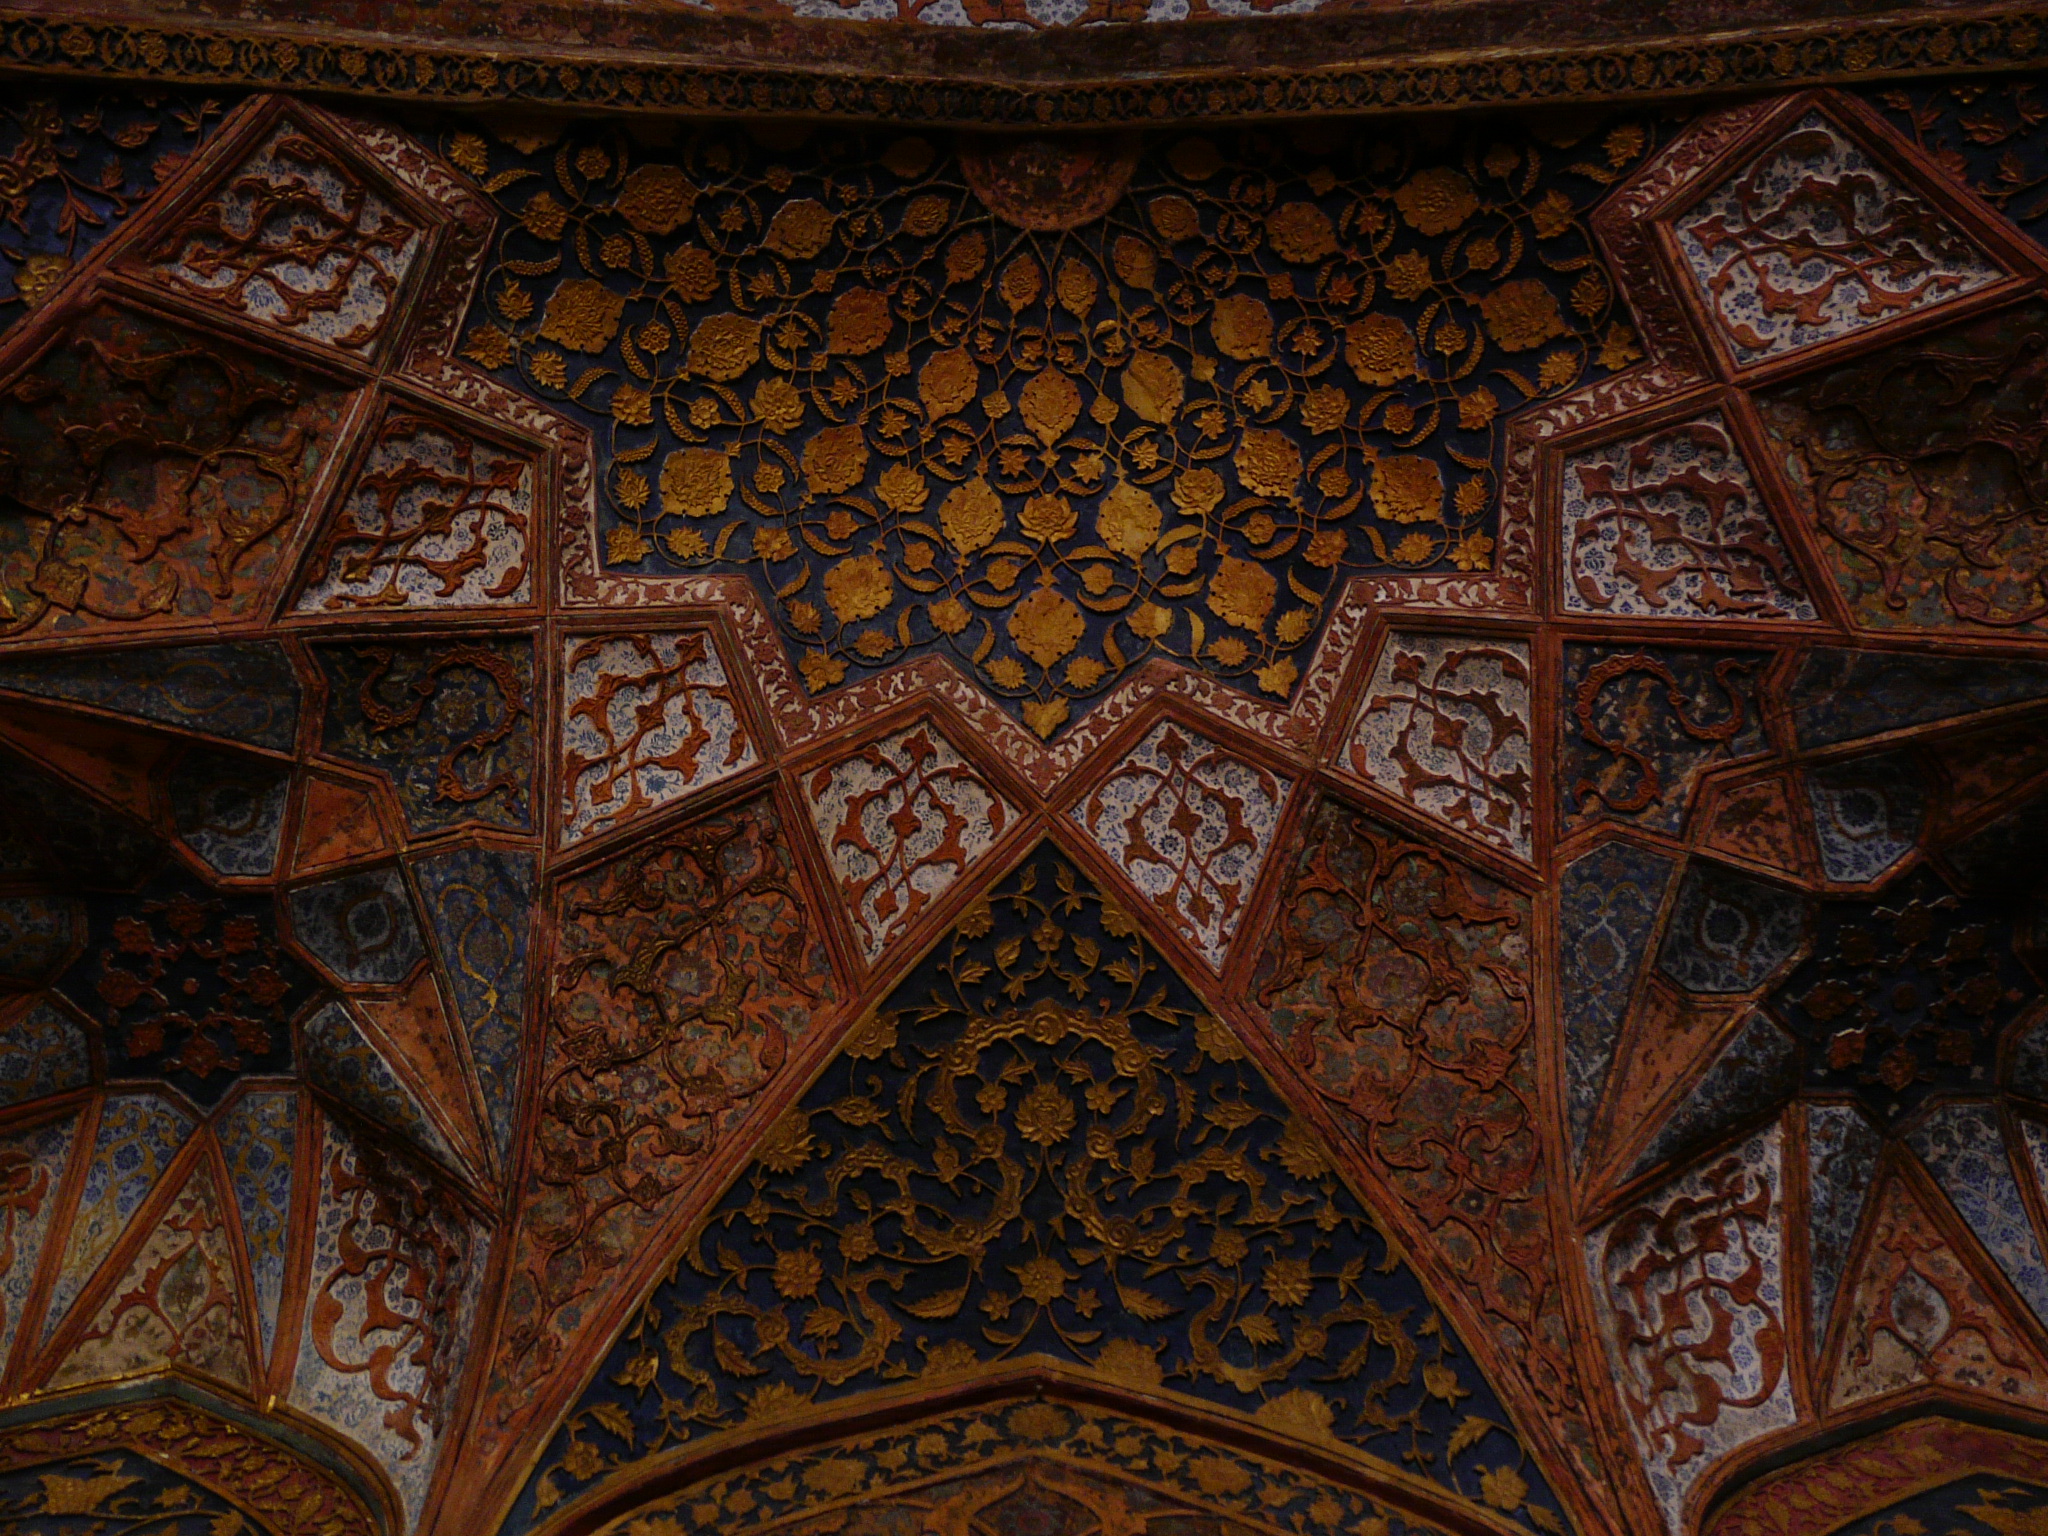 Tomb of Akbar the Great